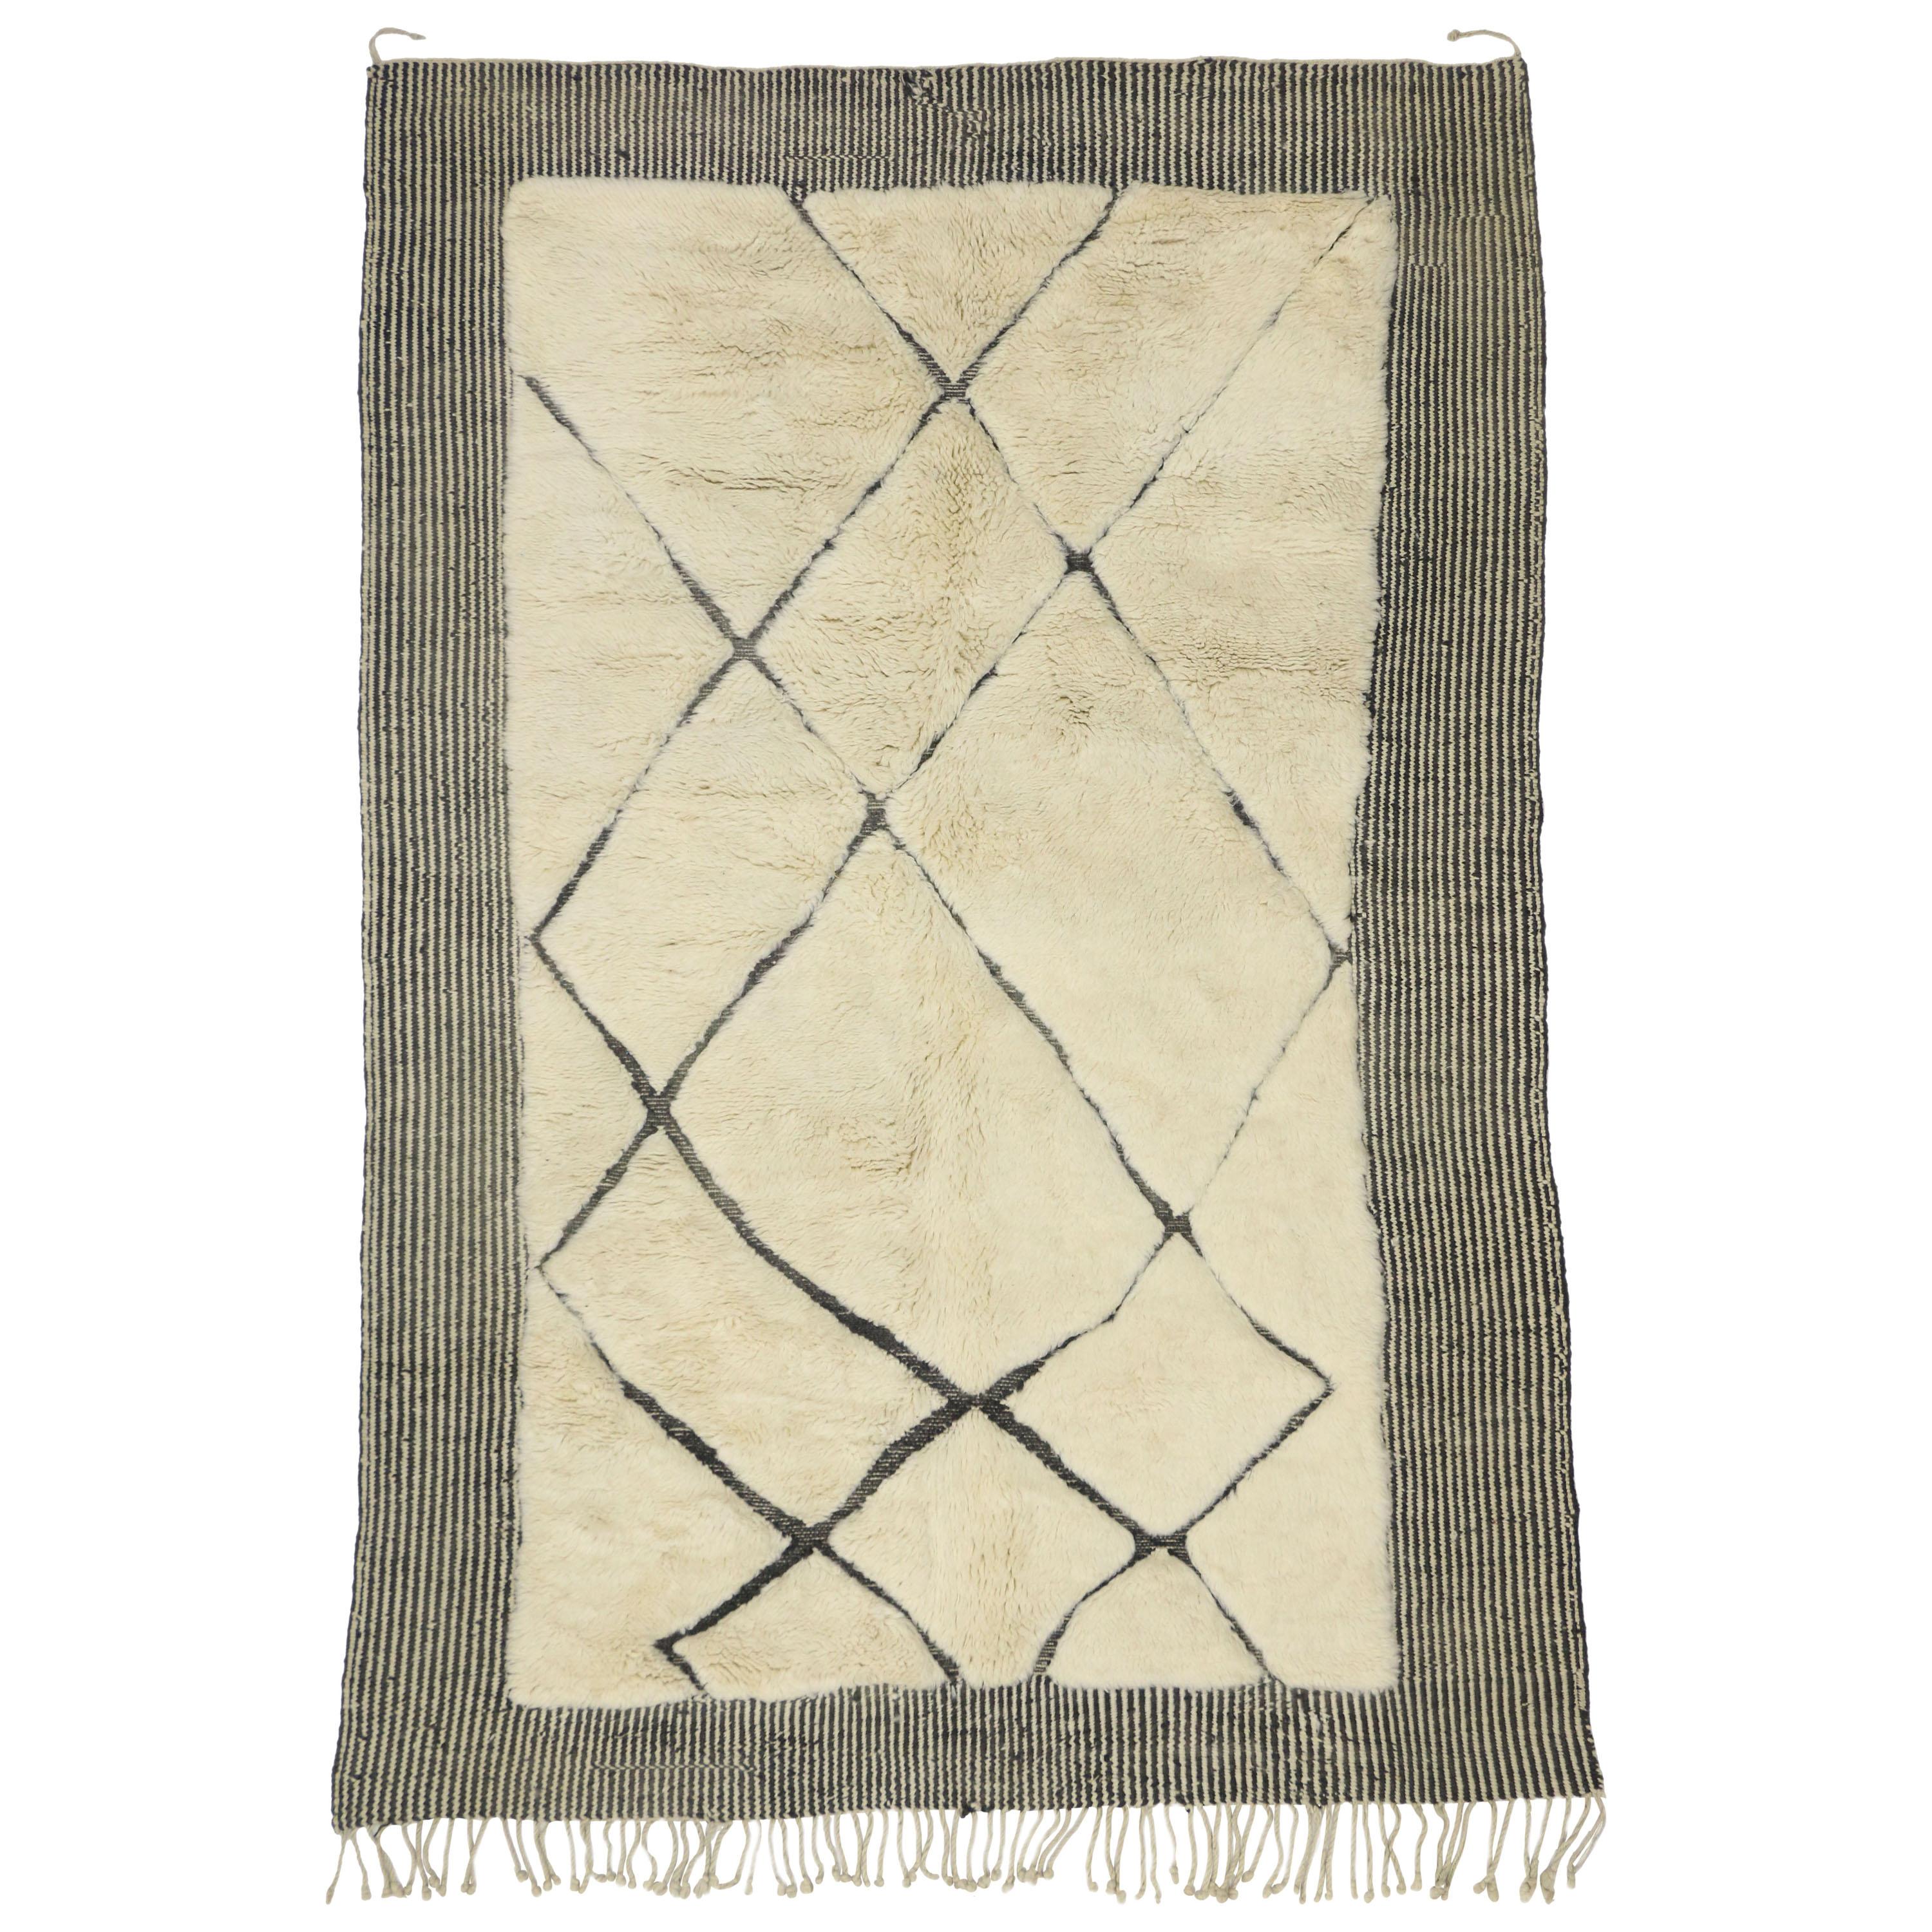 High and Low Texture Moroccan Rug with Asymmetrical Design, Berber Moroccan Rug